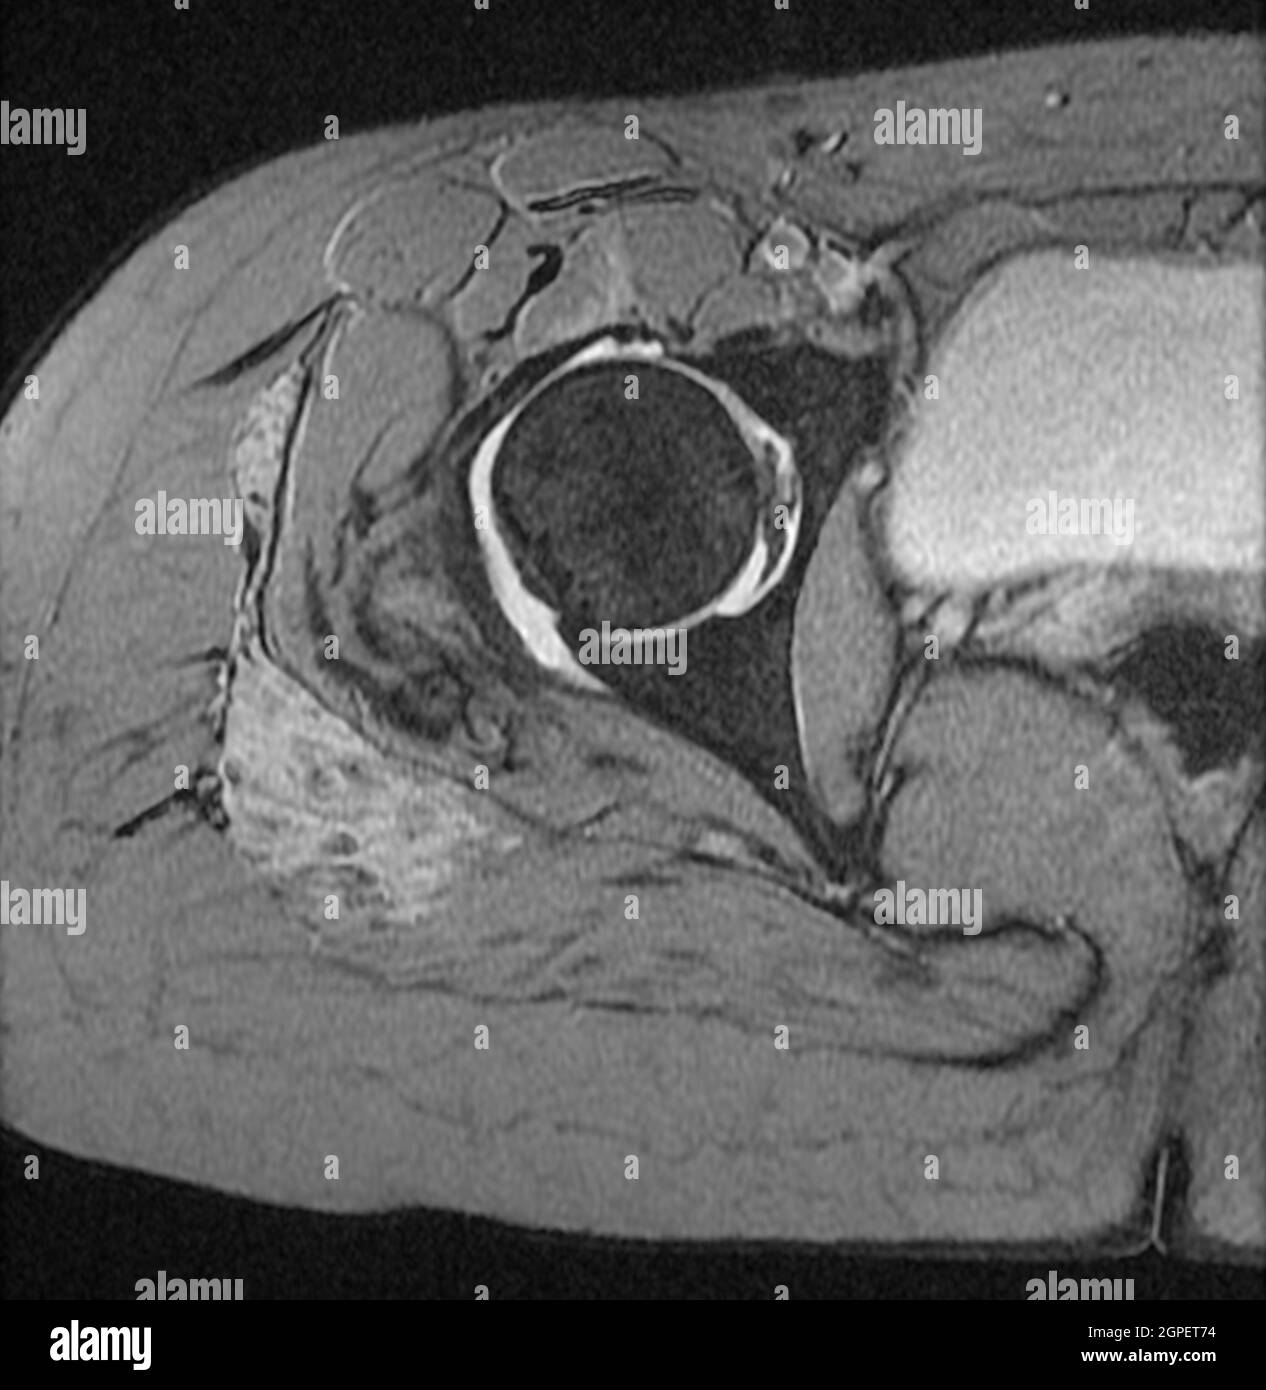 MRI of 20 year old female hip with signs of Hemangioma on upper right thigh. Stock Photo